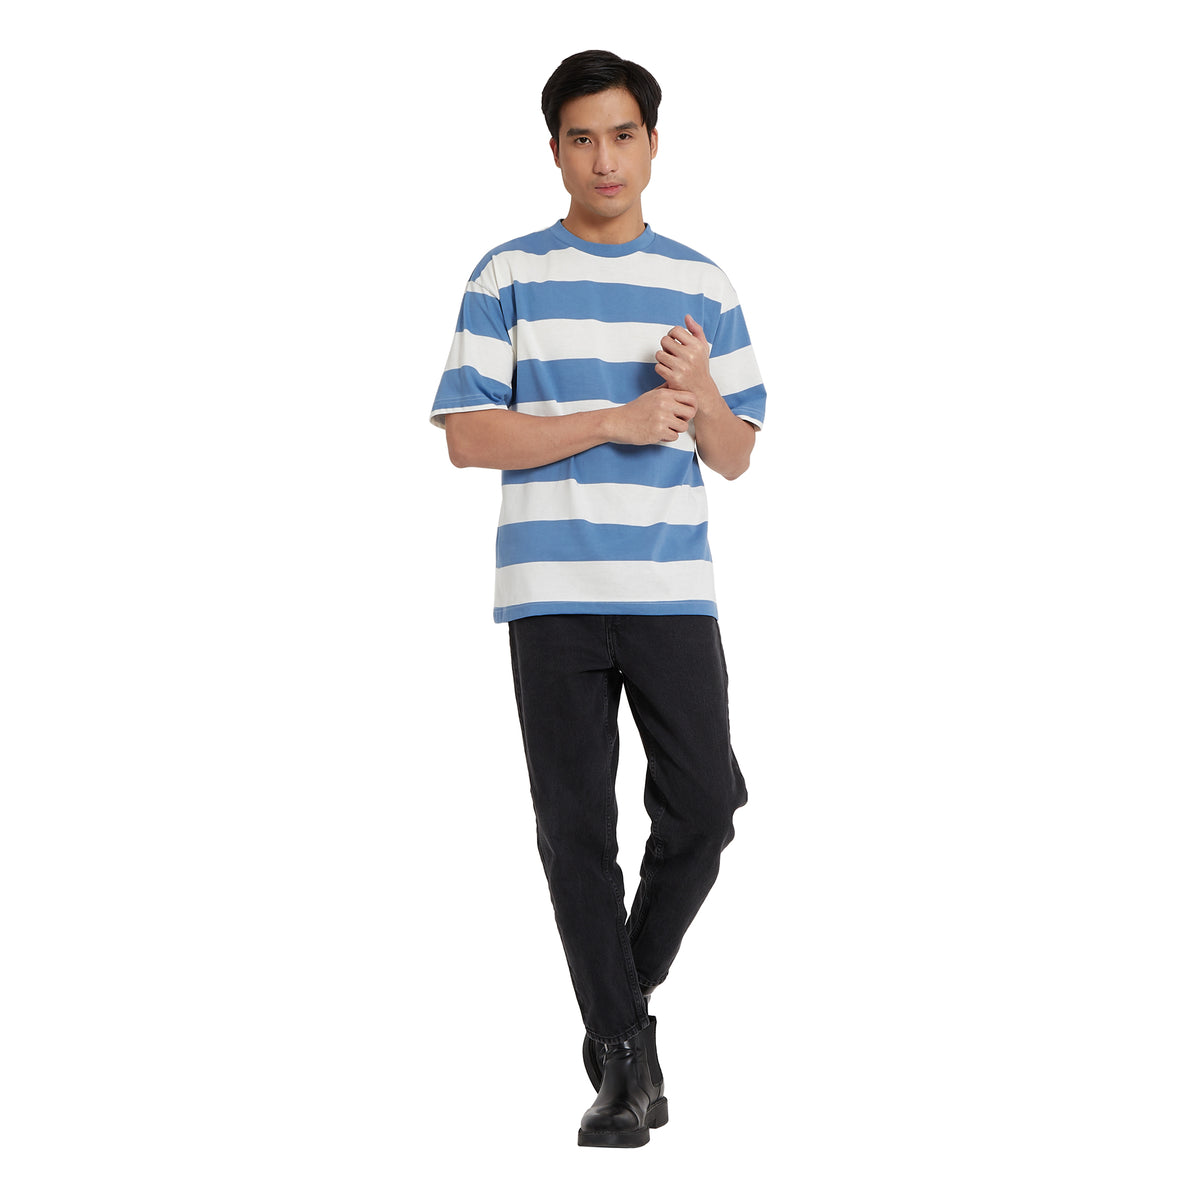 Cubic Men Basic Stripes  Oversized Boxy Tee / Box Fit T shirt Top Top for Men - CMBOS04R